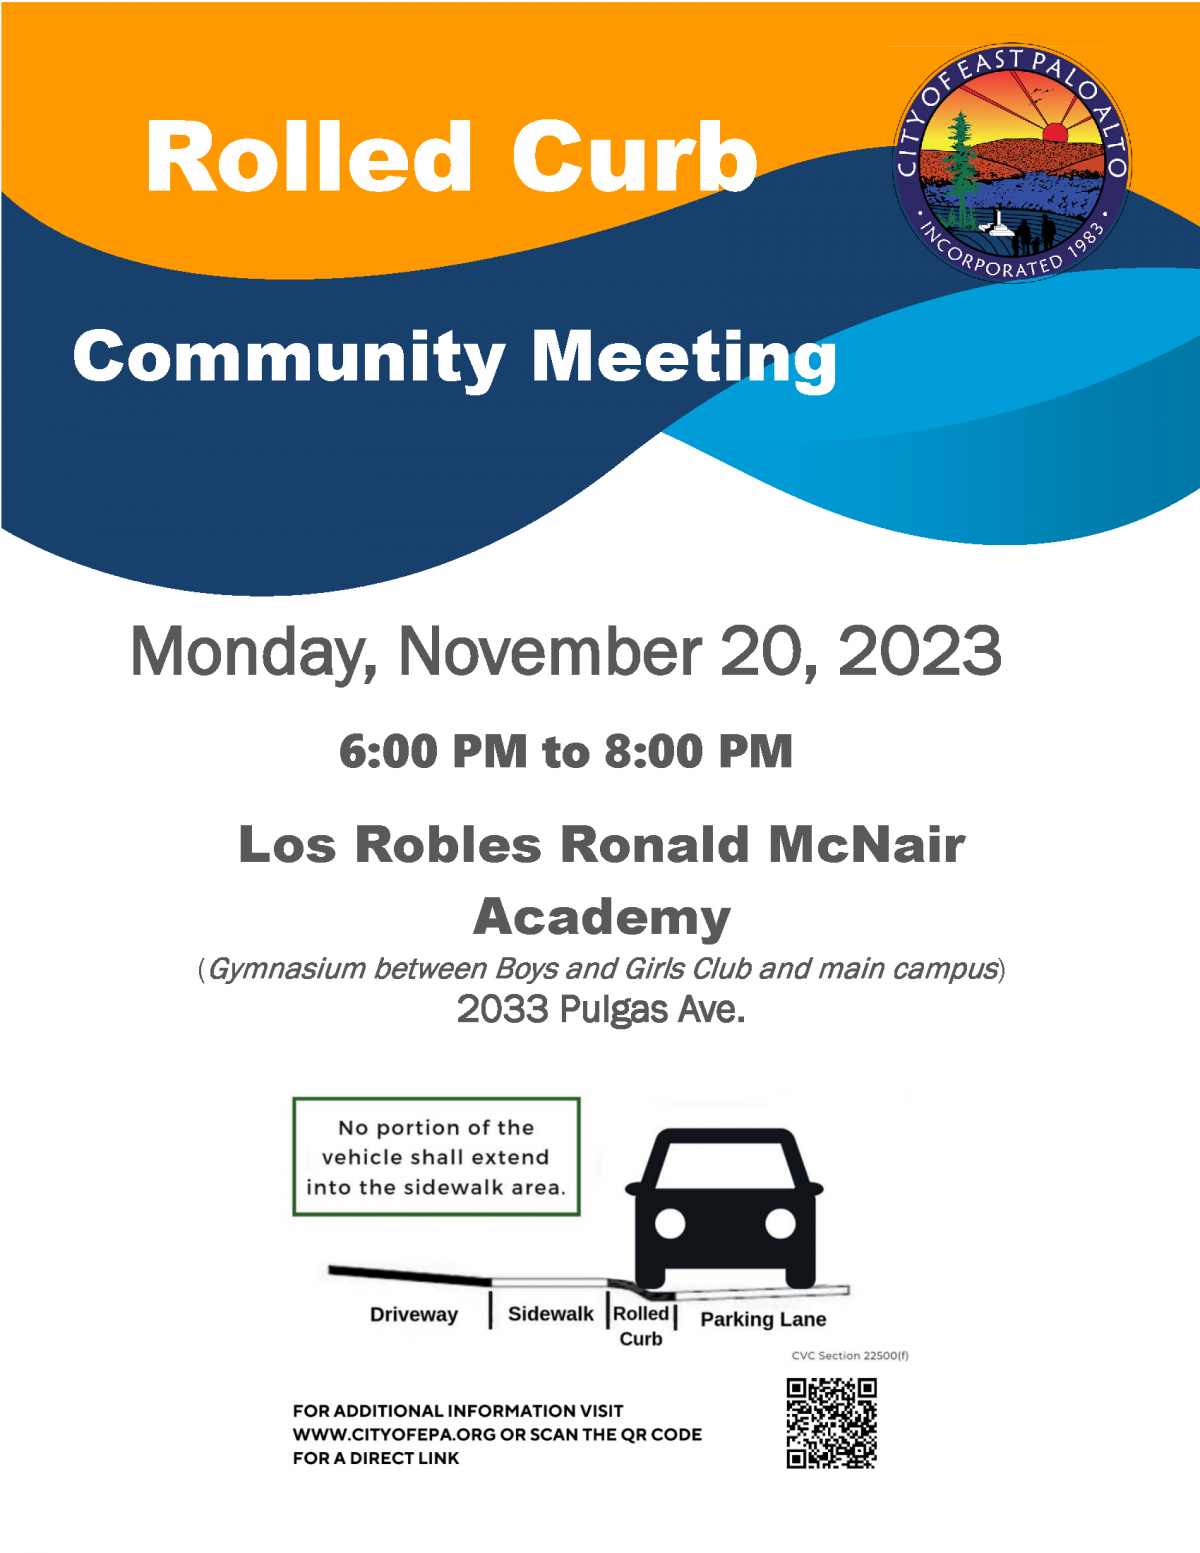 Rolled Curb meeting flyer